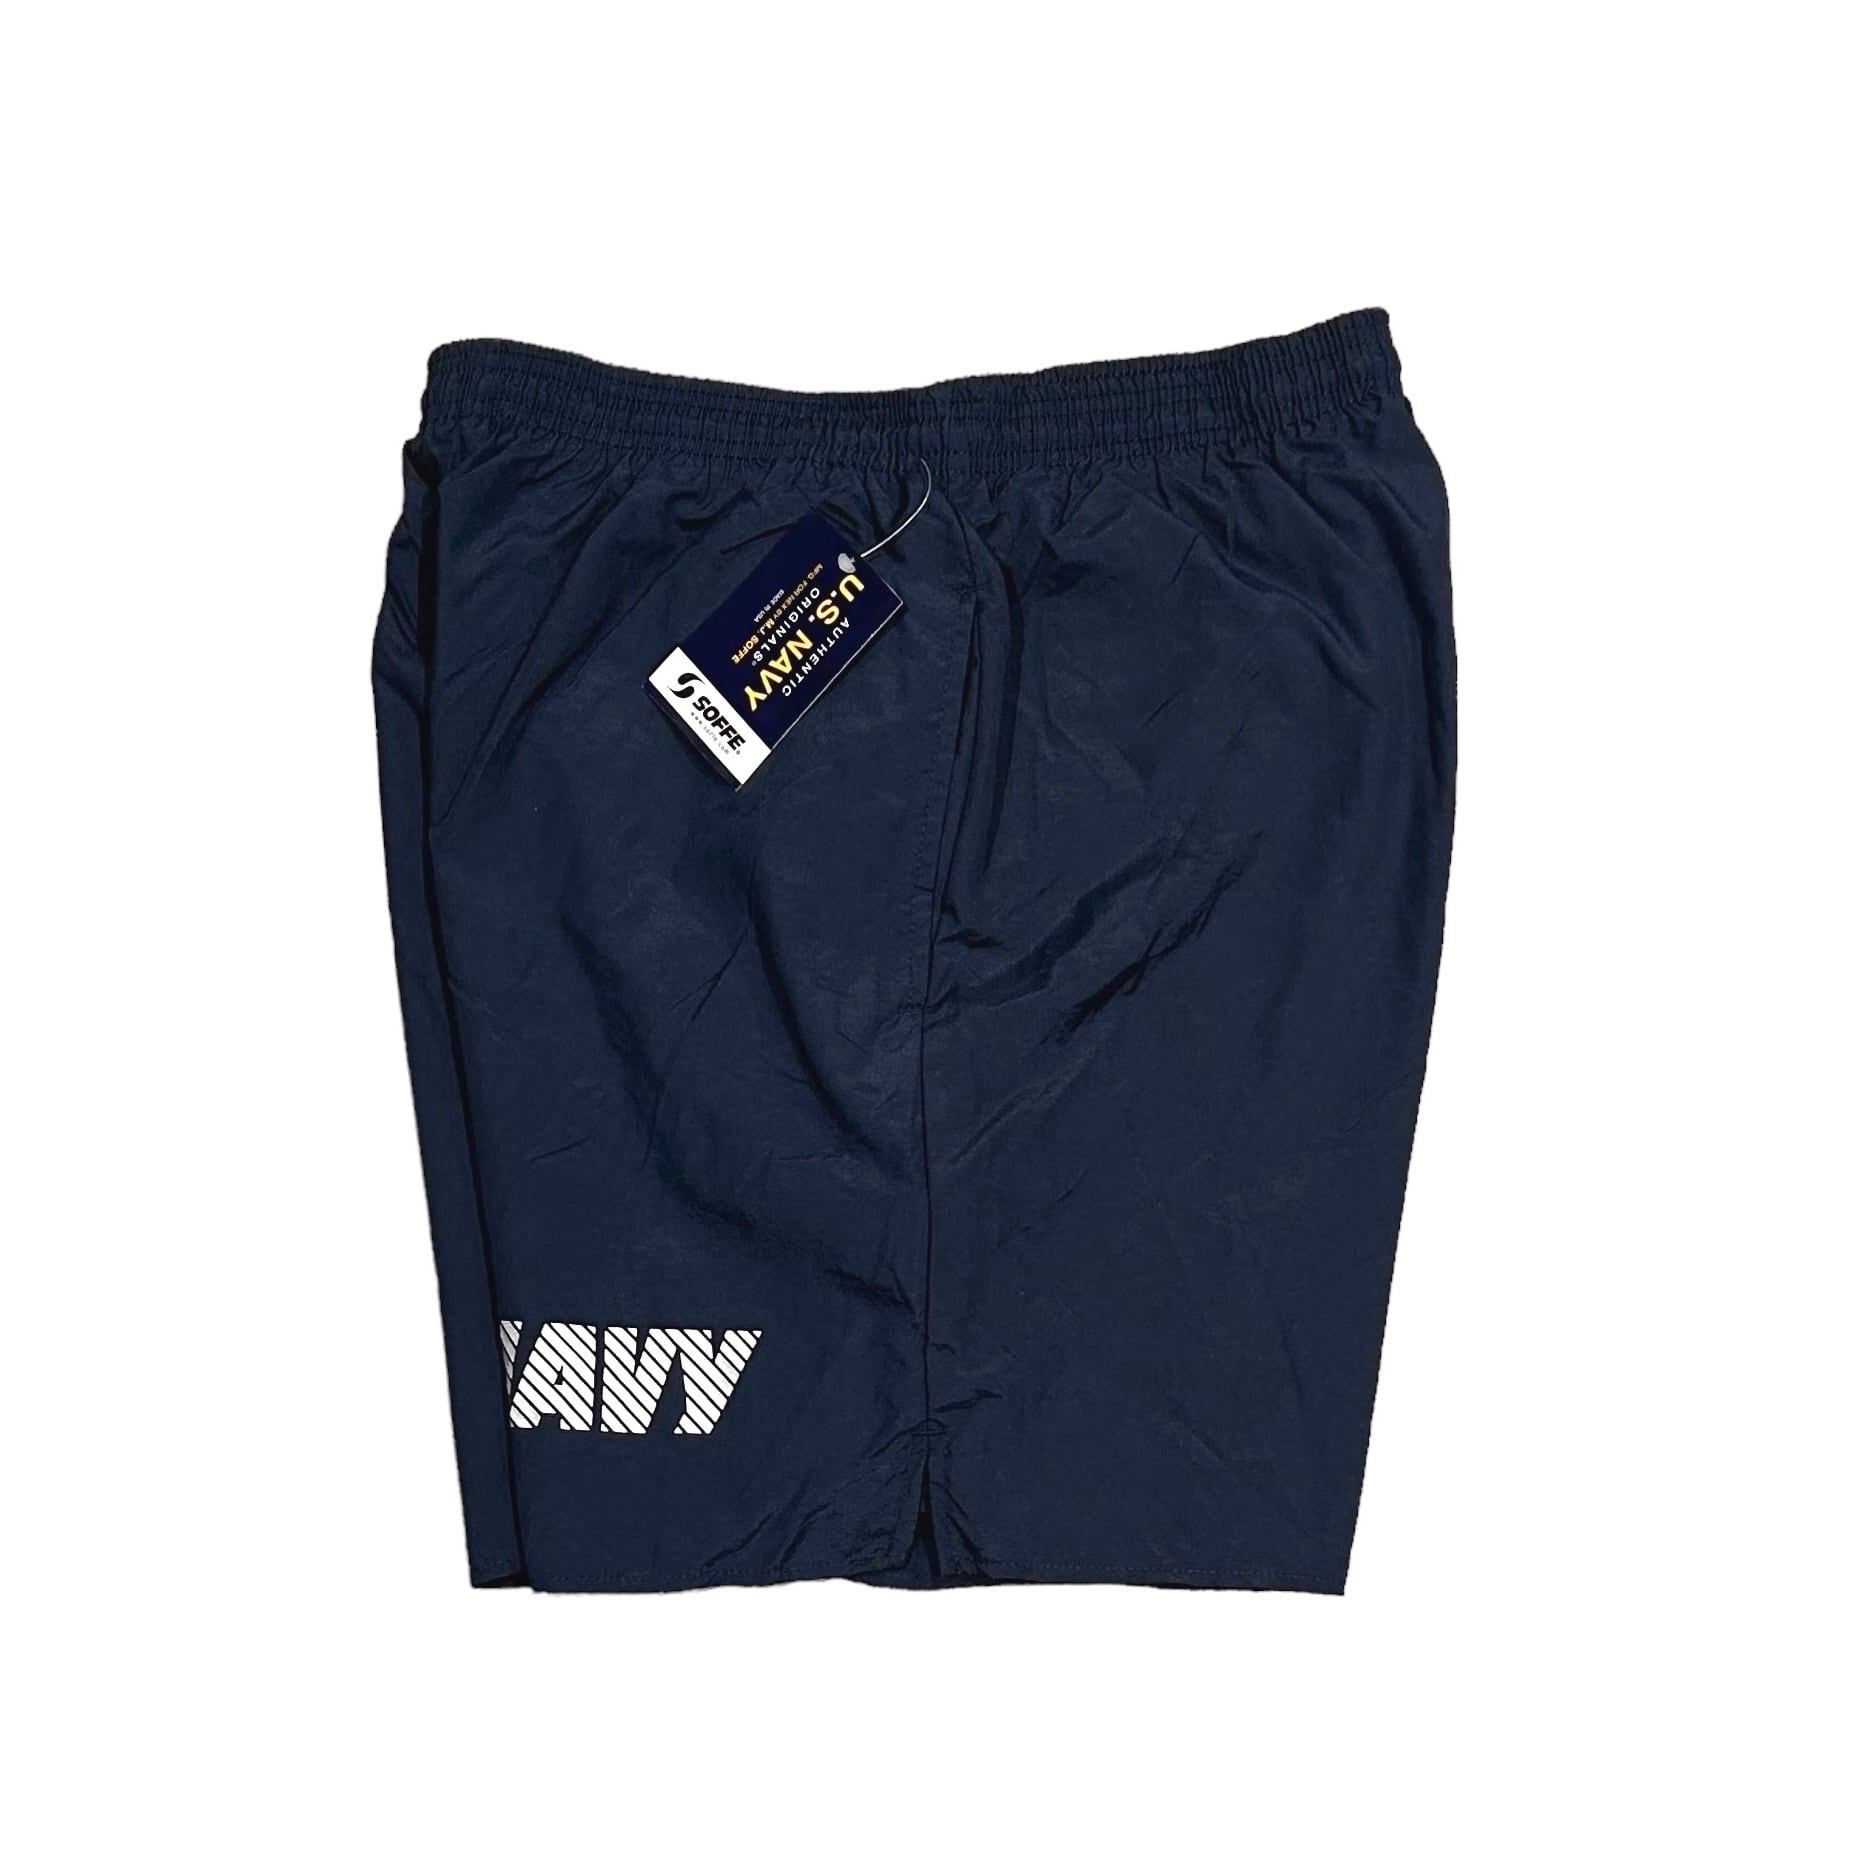 SOFFE USA製 US Navy Official Physical Training Shorts アメリカ軍 ソフィー ミリタリー  フィジカルトレーニングショーツ WhiteHeadEagle